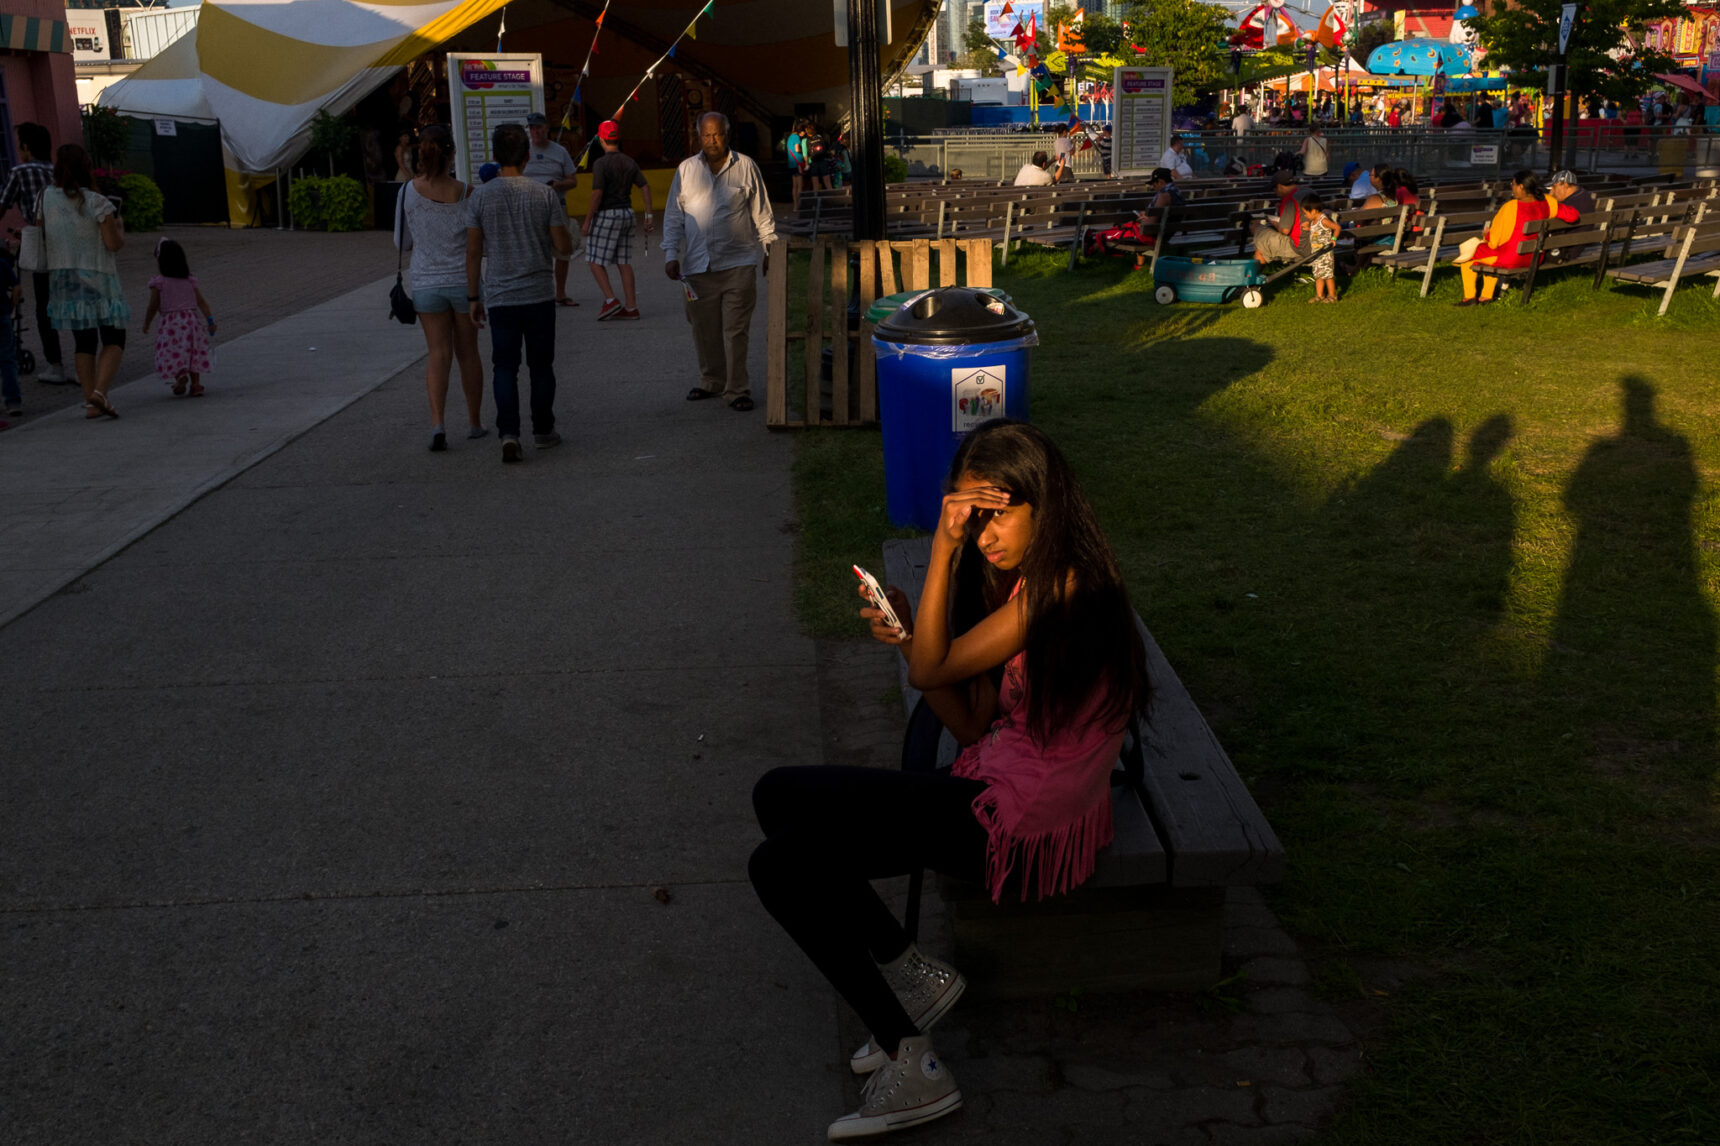 Street Photographer's Guide To The CNE - Shoot The Periphery